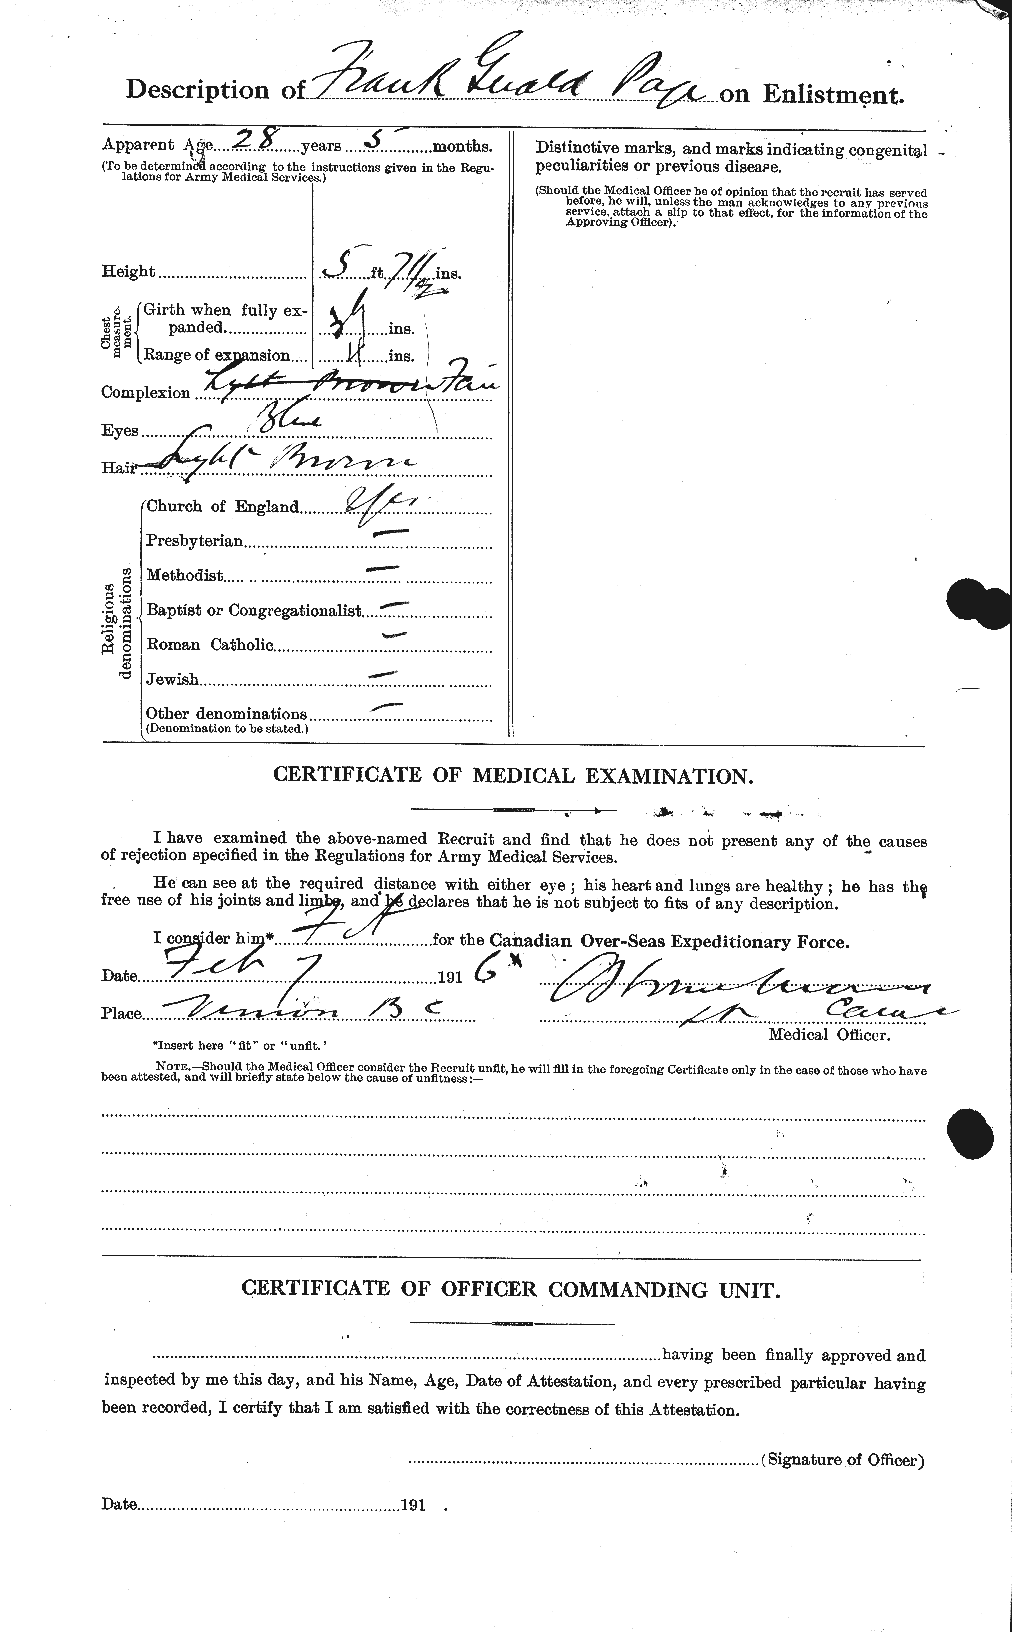 Personnel Records of the First World War - CEF 562069b